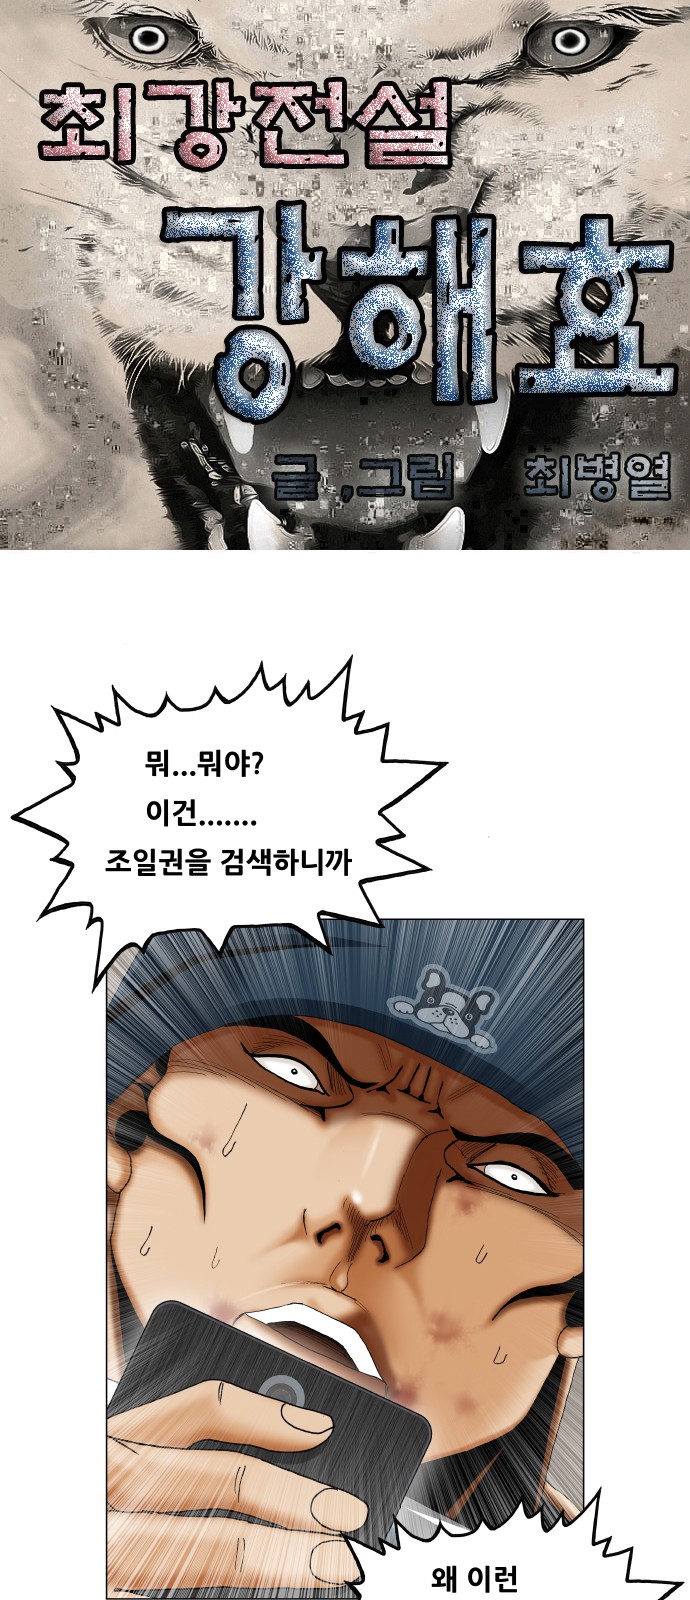 Ultimate Legend - Kang Hae Hyo - Chapter 430 - Page 1